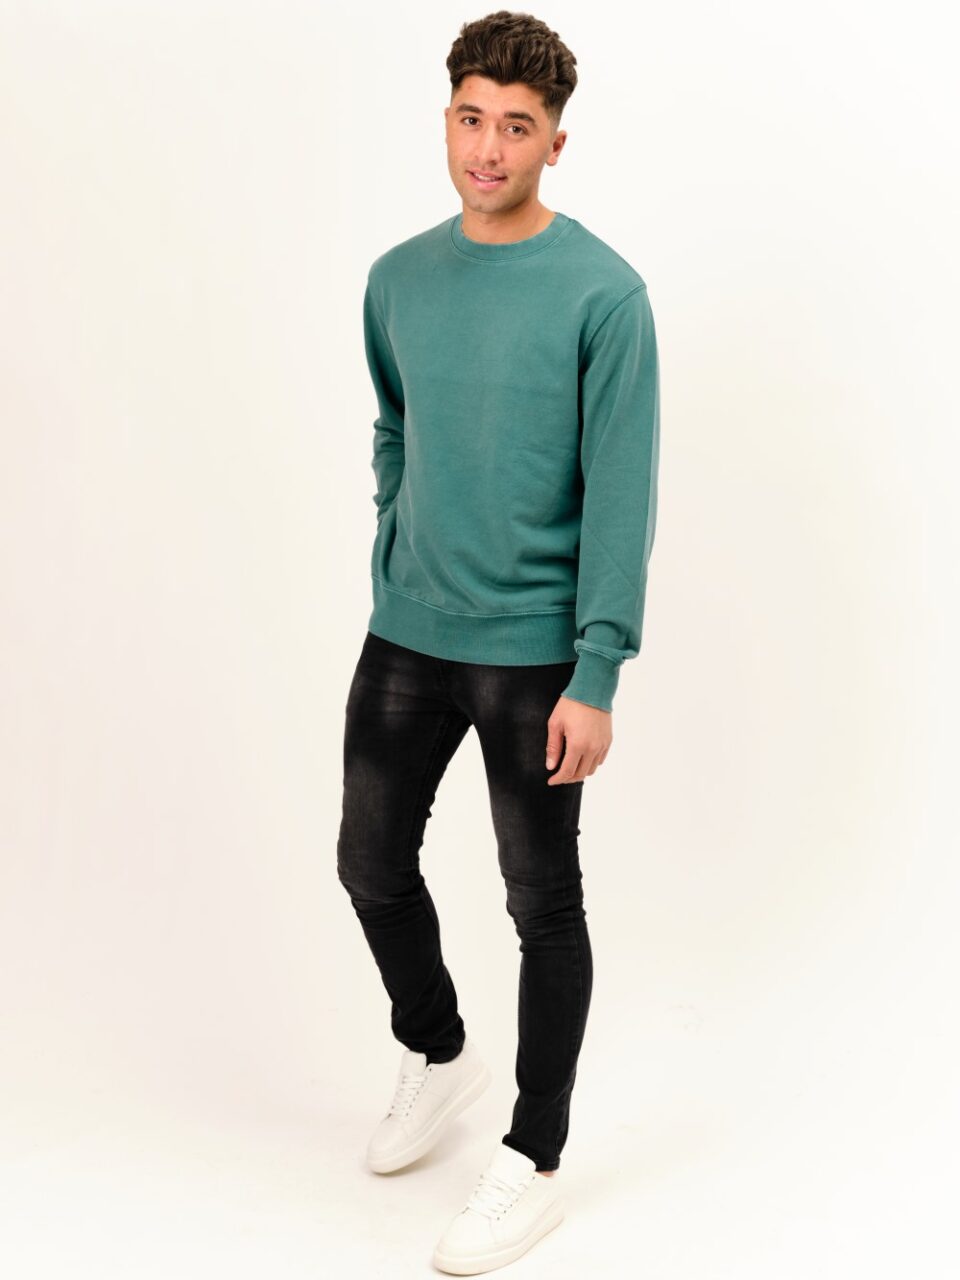 STROM Clothing_Basics_Washed Teal Green Sweater